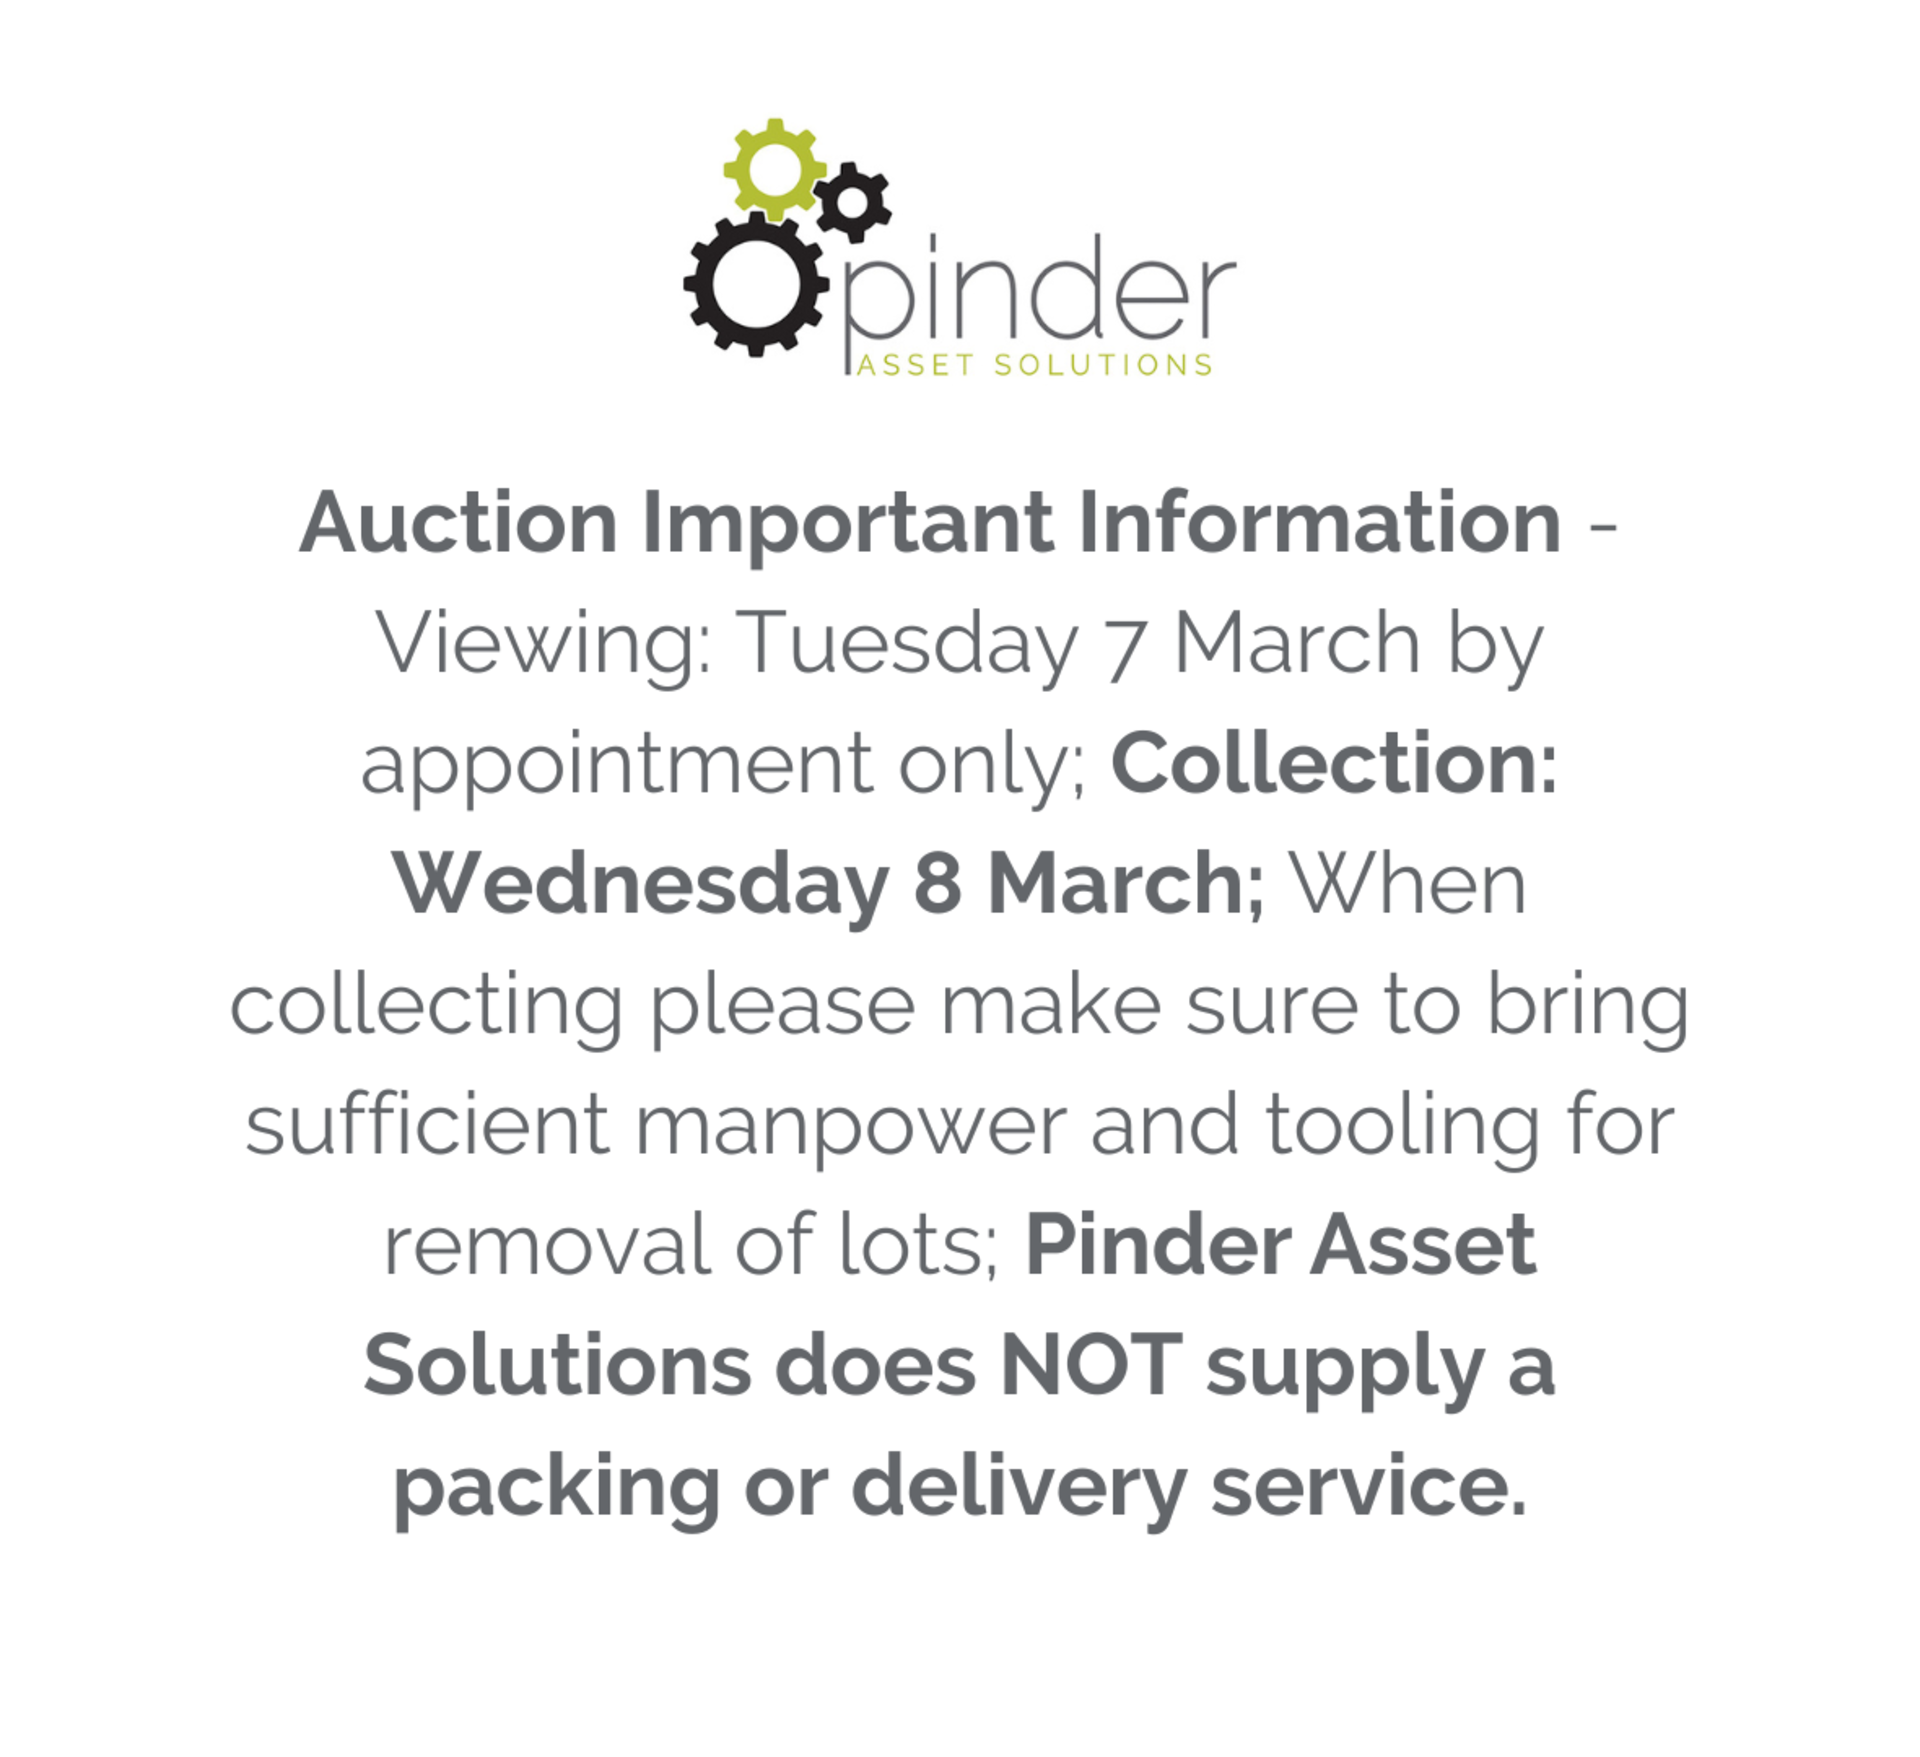 Auction Important Information - Viewing: Tuesday 7 March by appointment only; Collection: